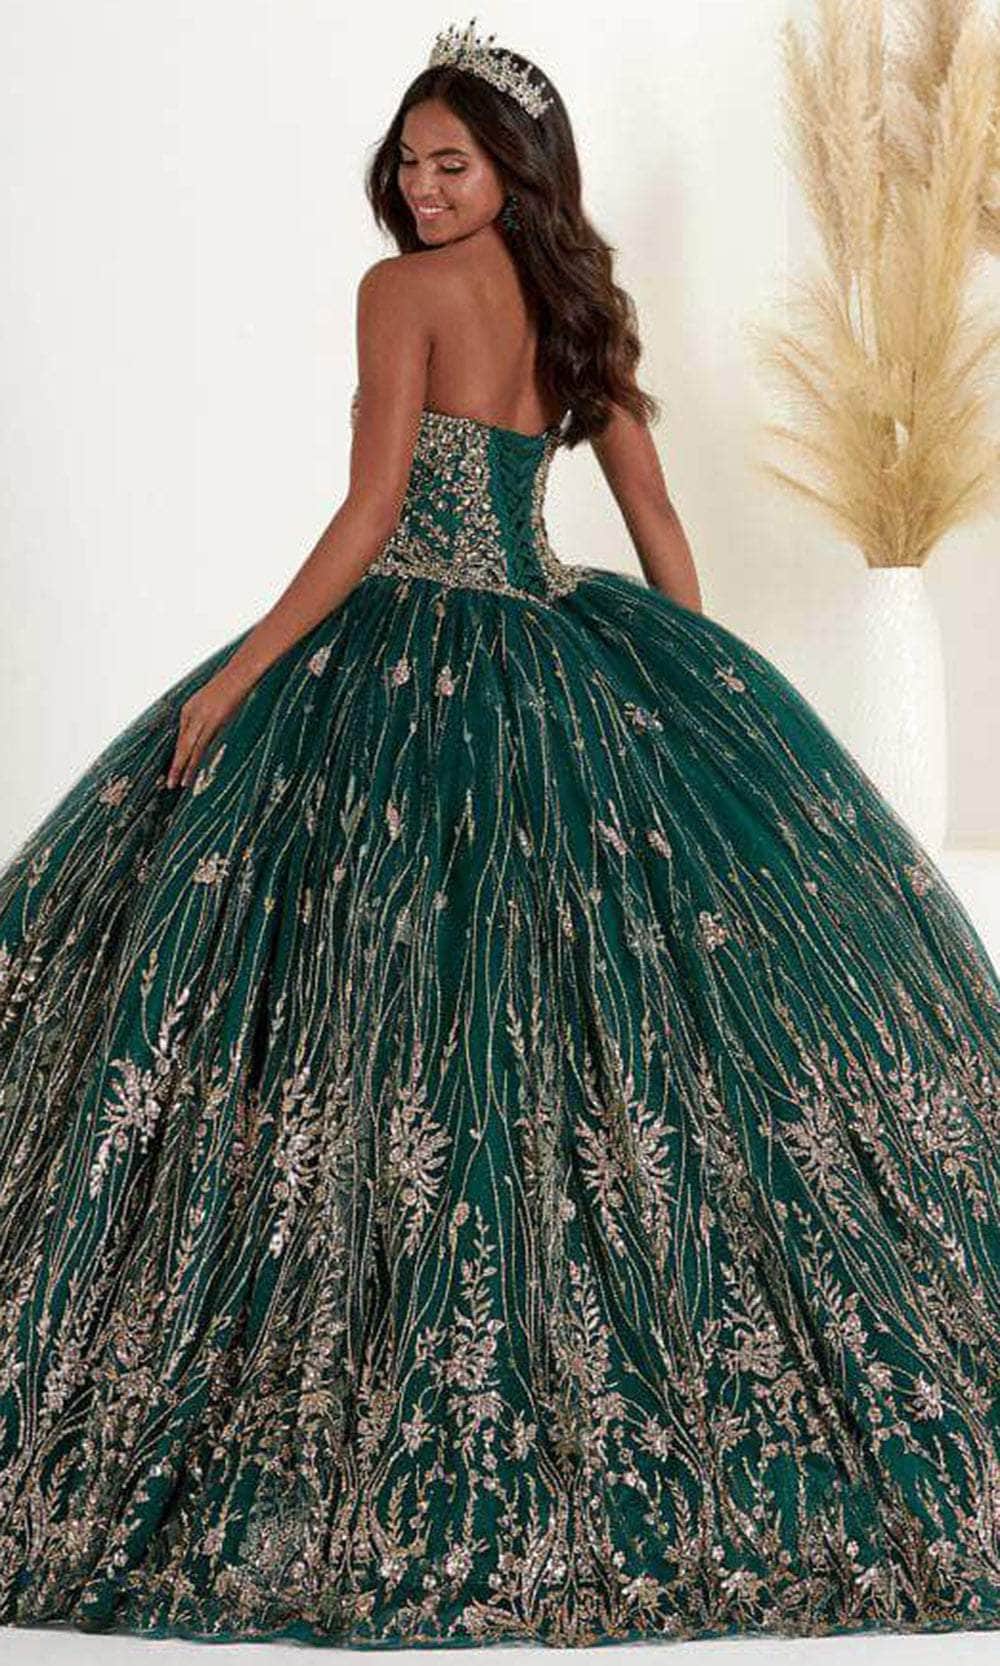 Fiesta Gowns 56458 - Bejeweled Strapless Ballgown Special Occasion Dress